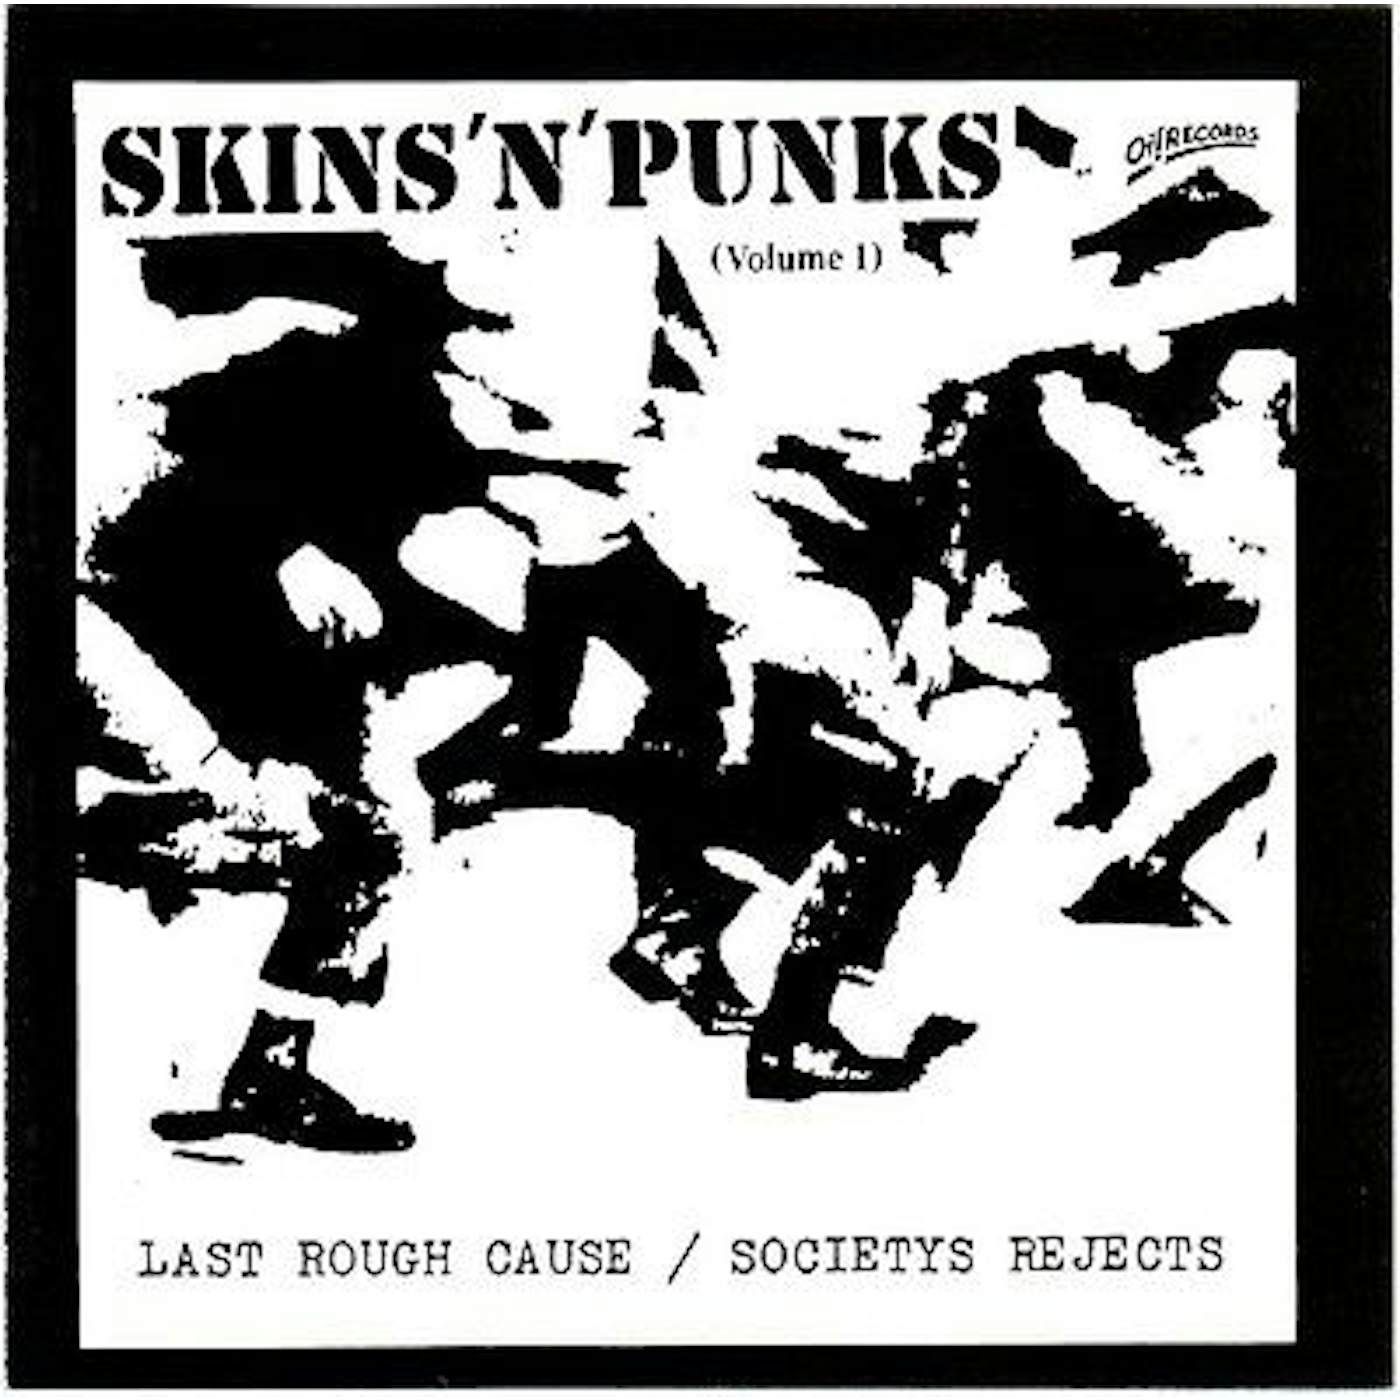 Last Rough Cause / Societys Rejects SKINS N PUNKS 1 Vinyl Record